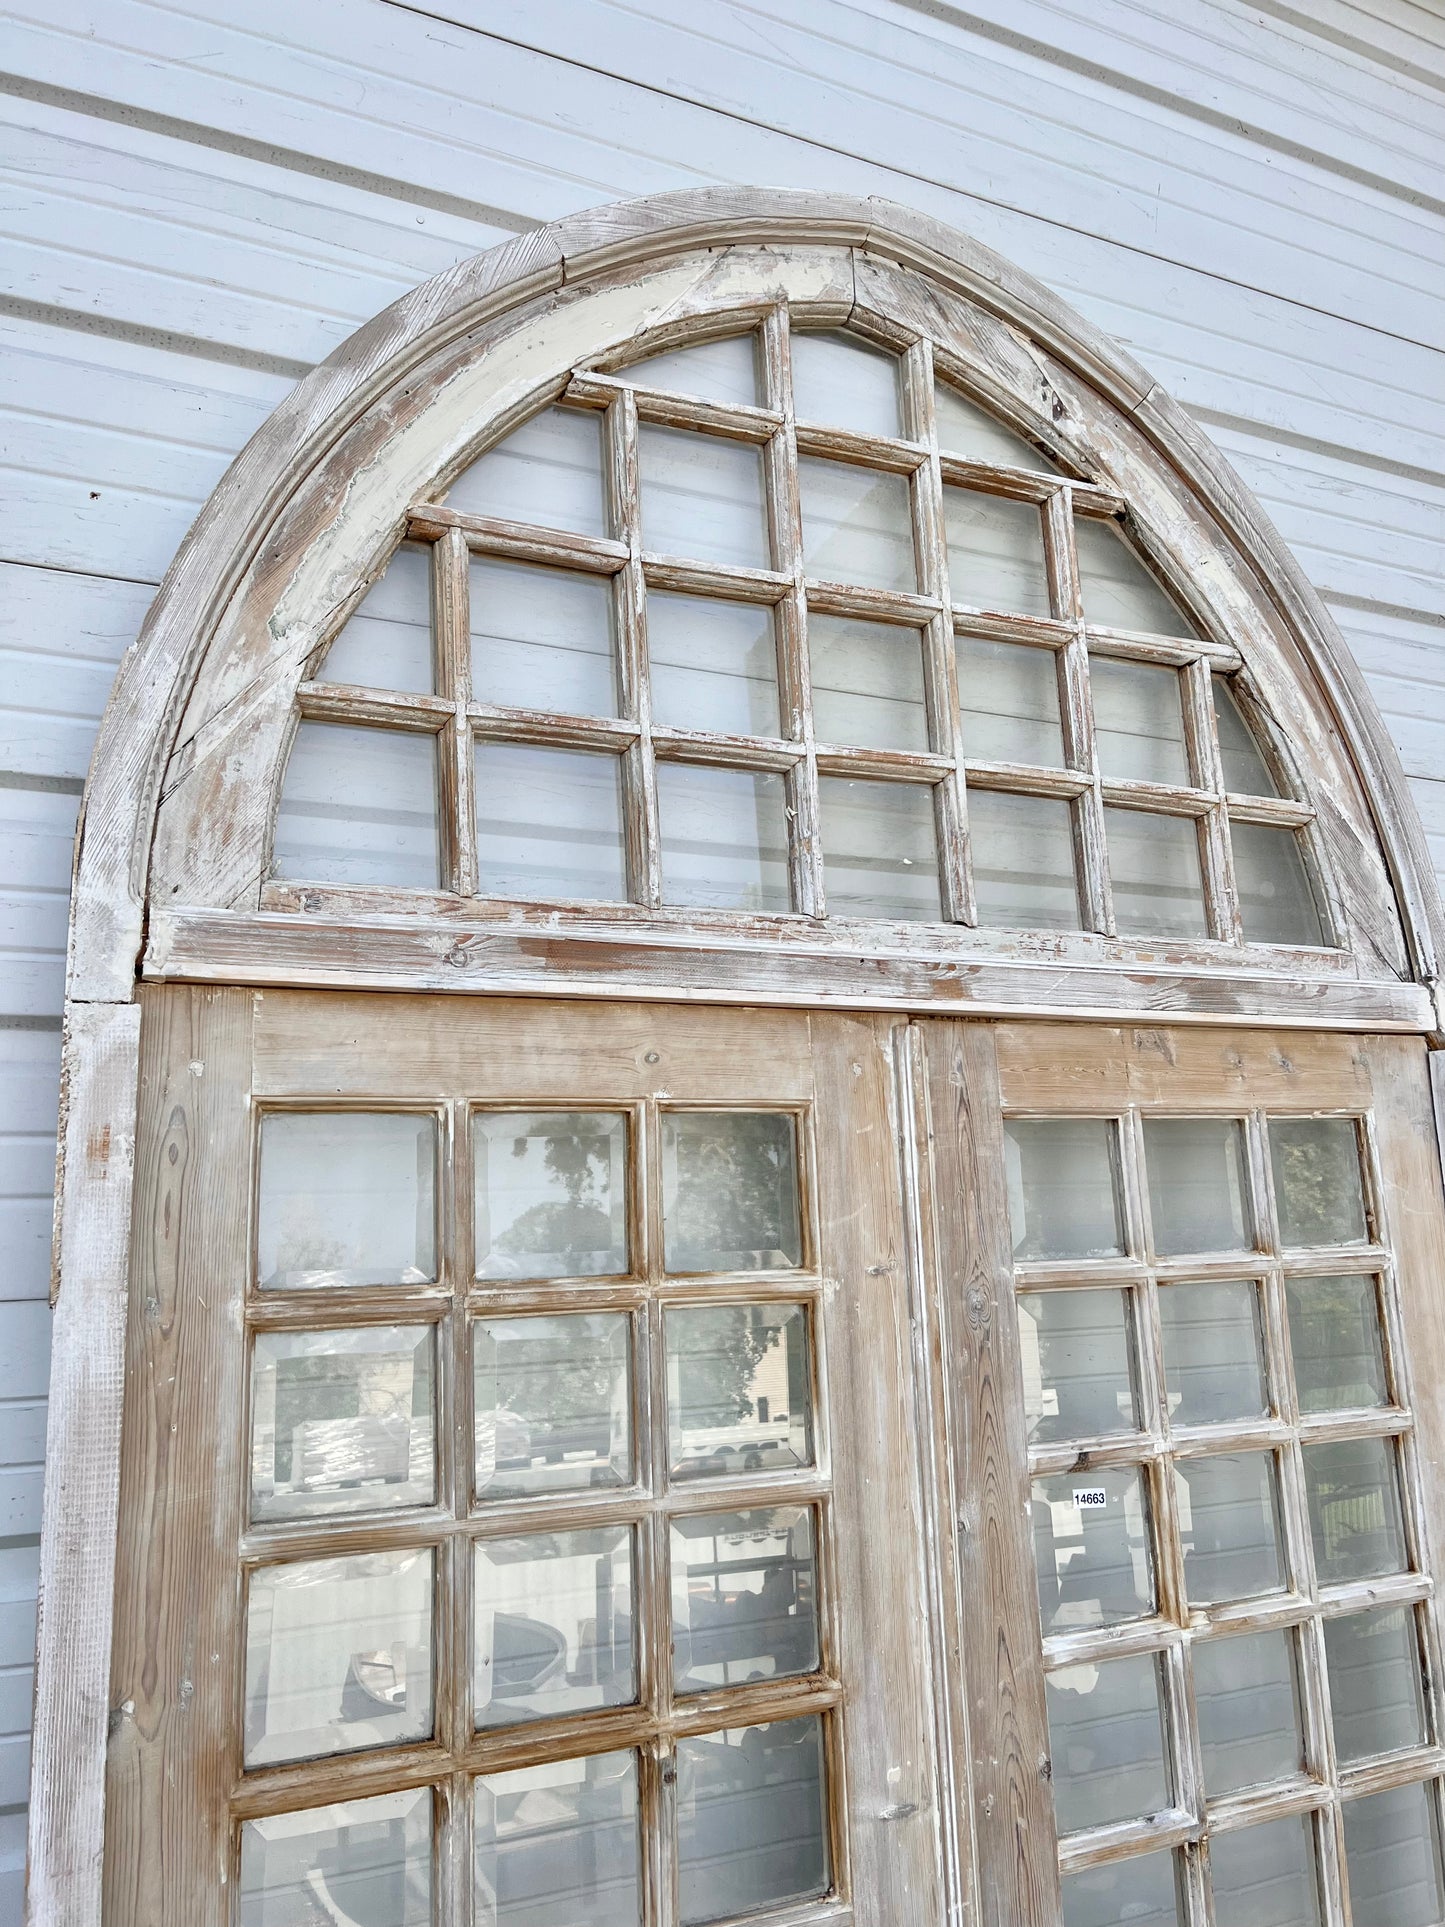 Pair of Bleached Antique Wood Doors w/Arched Transom Top